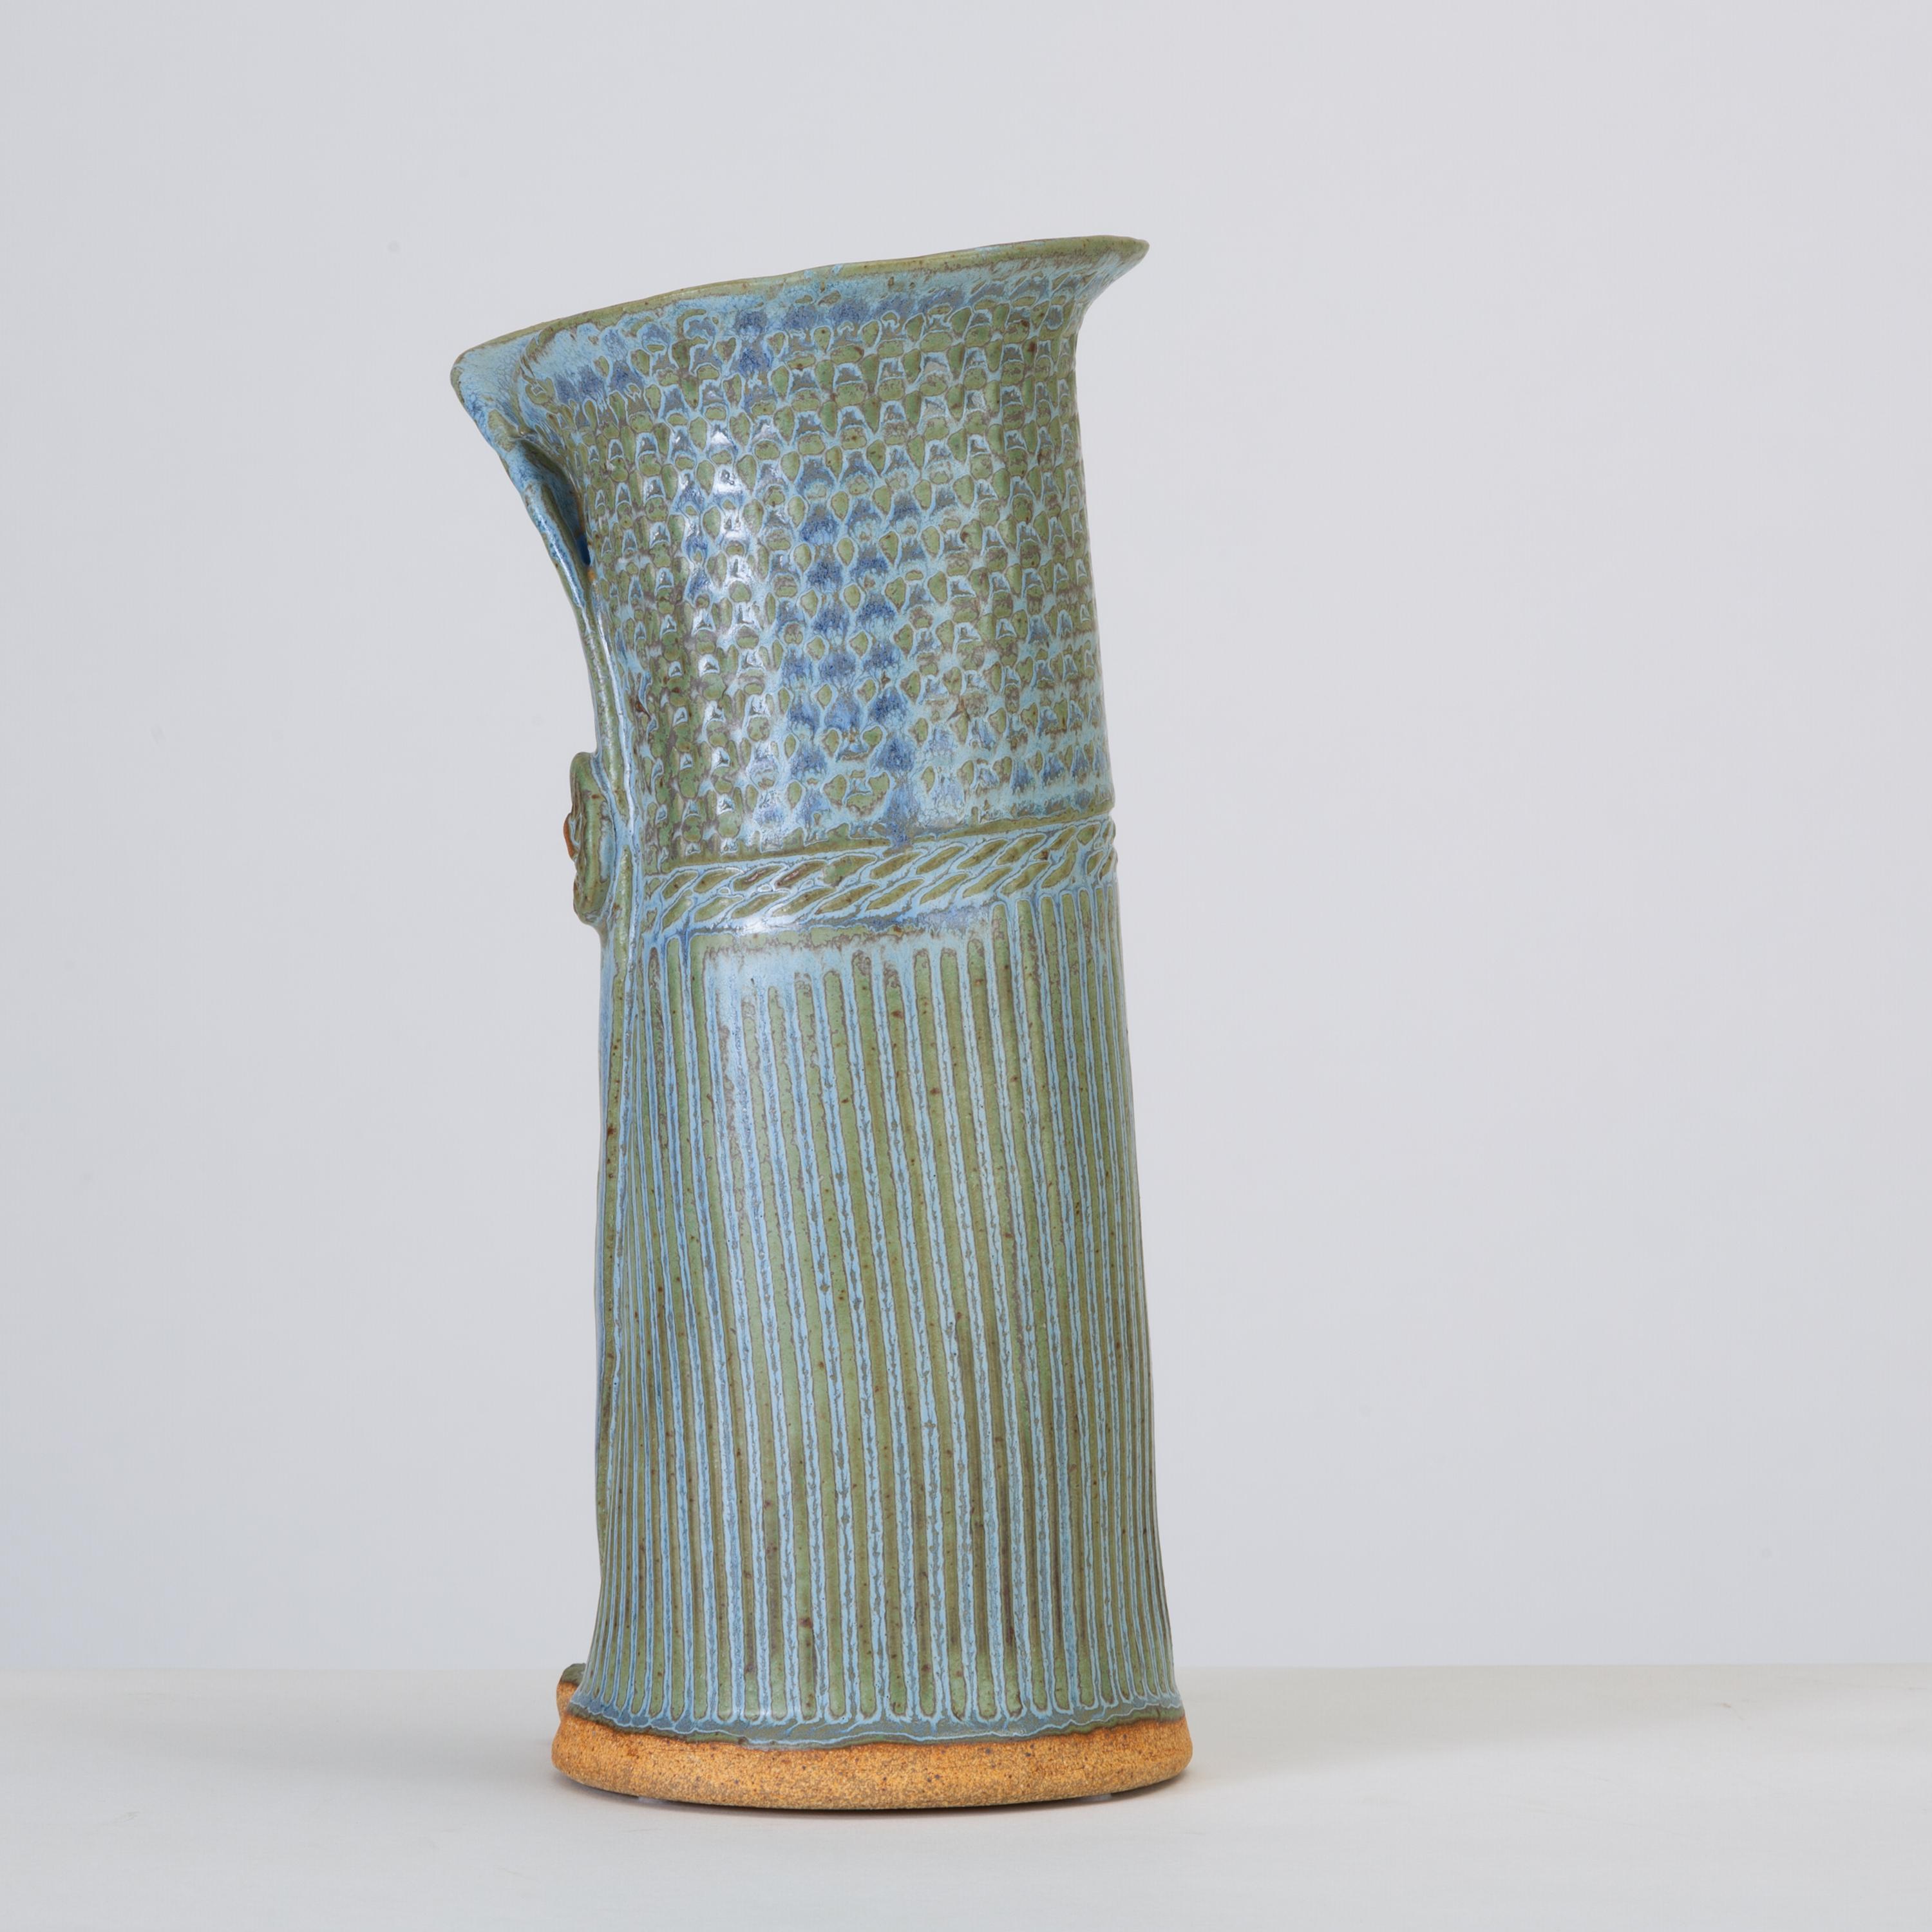 A unique asymmetric vase with a blue-green varicolor glaze and sgraffito detailing. The piece is painted and incised to mimic the fibers of woven textiles and the edges of the clay have been folded over each other to mimic layers of cloth secured by